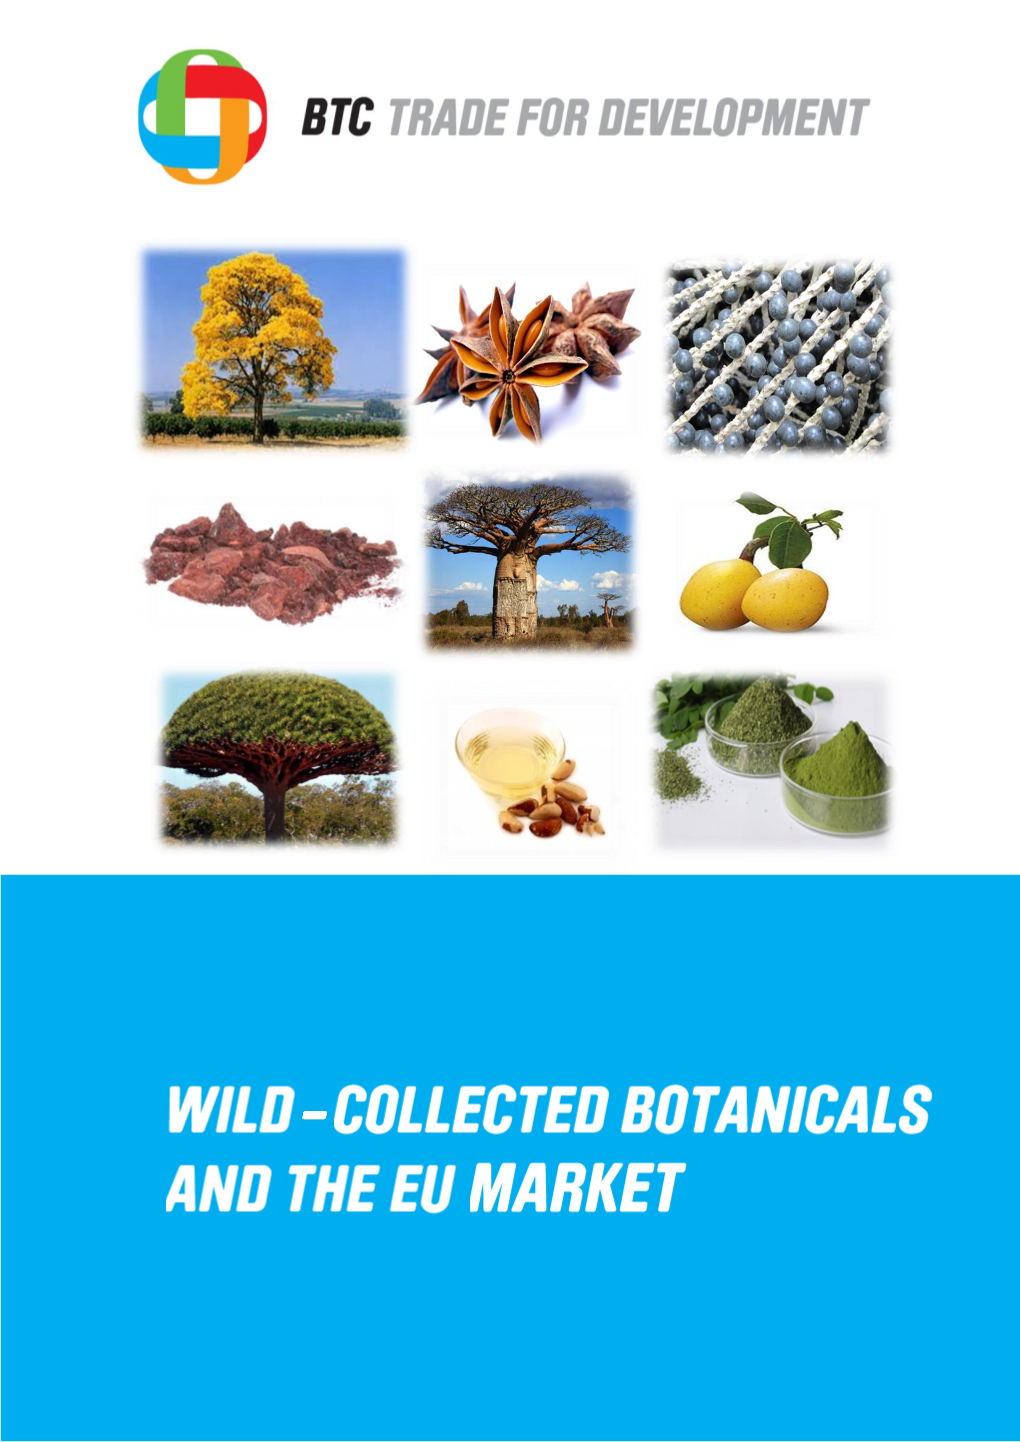 Wild-Collected Botanicals and the Eu Market Final Report.Pdf 3.27 MB